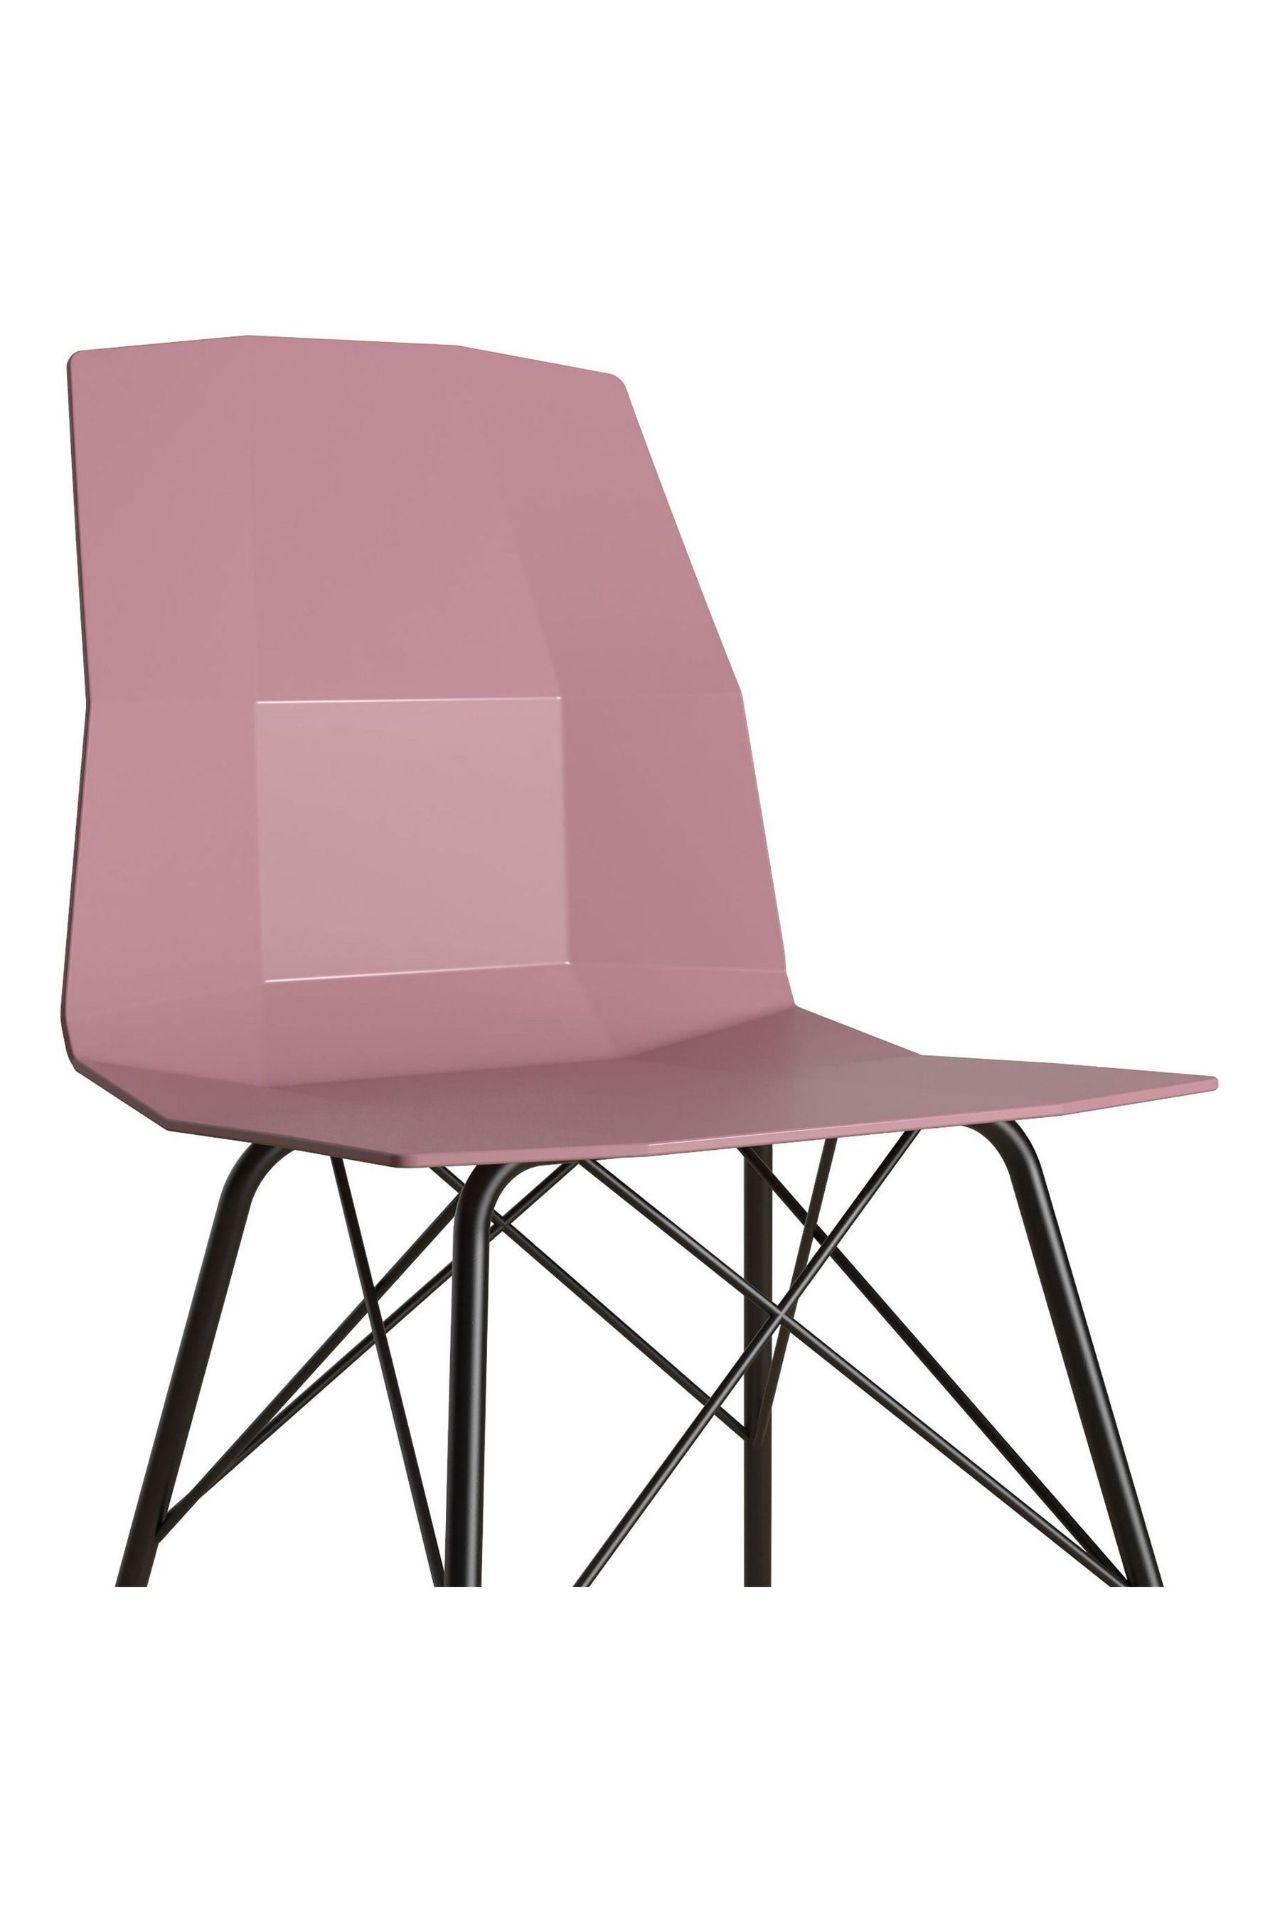 2 X Brand New Pink CosmoLiving Riley Dining Chair, Who needs ordinary when your home décor can be